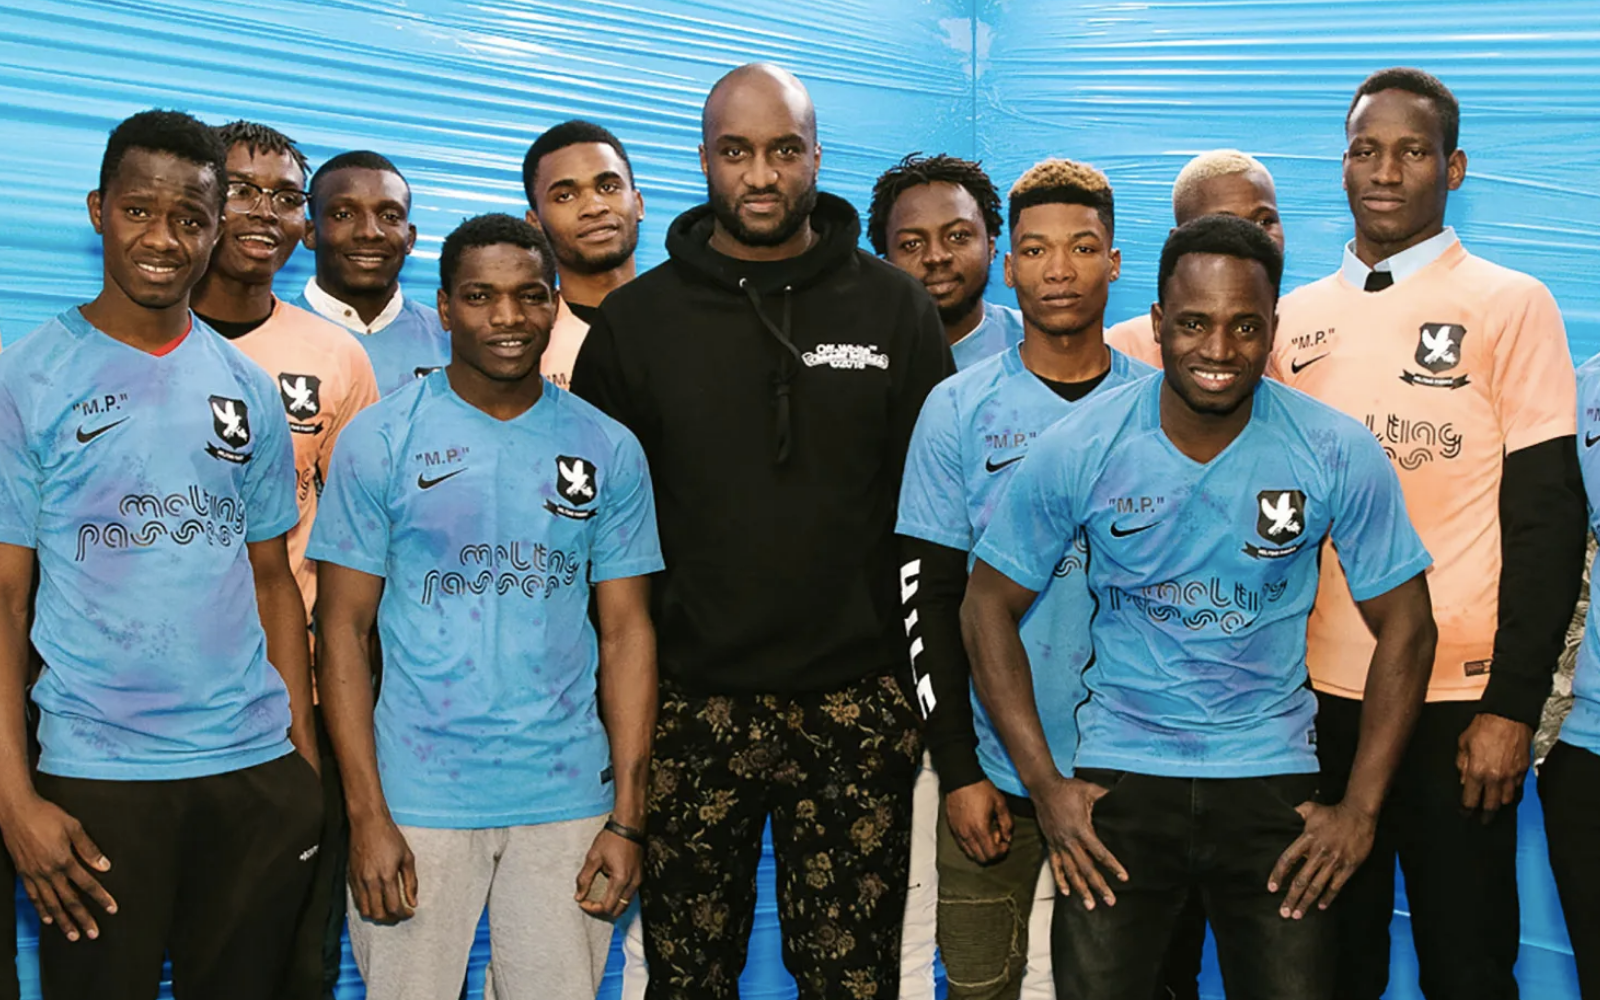 Virgil Abloh, Heron Preston, and More Contribute Designs to 'Our Lives in  T-Shirts' Charity Project in Miami